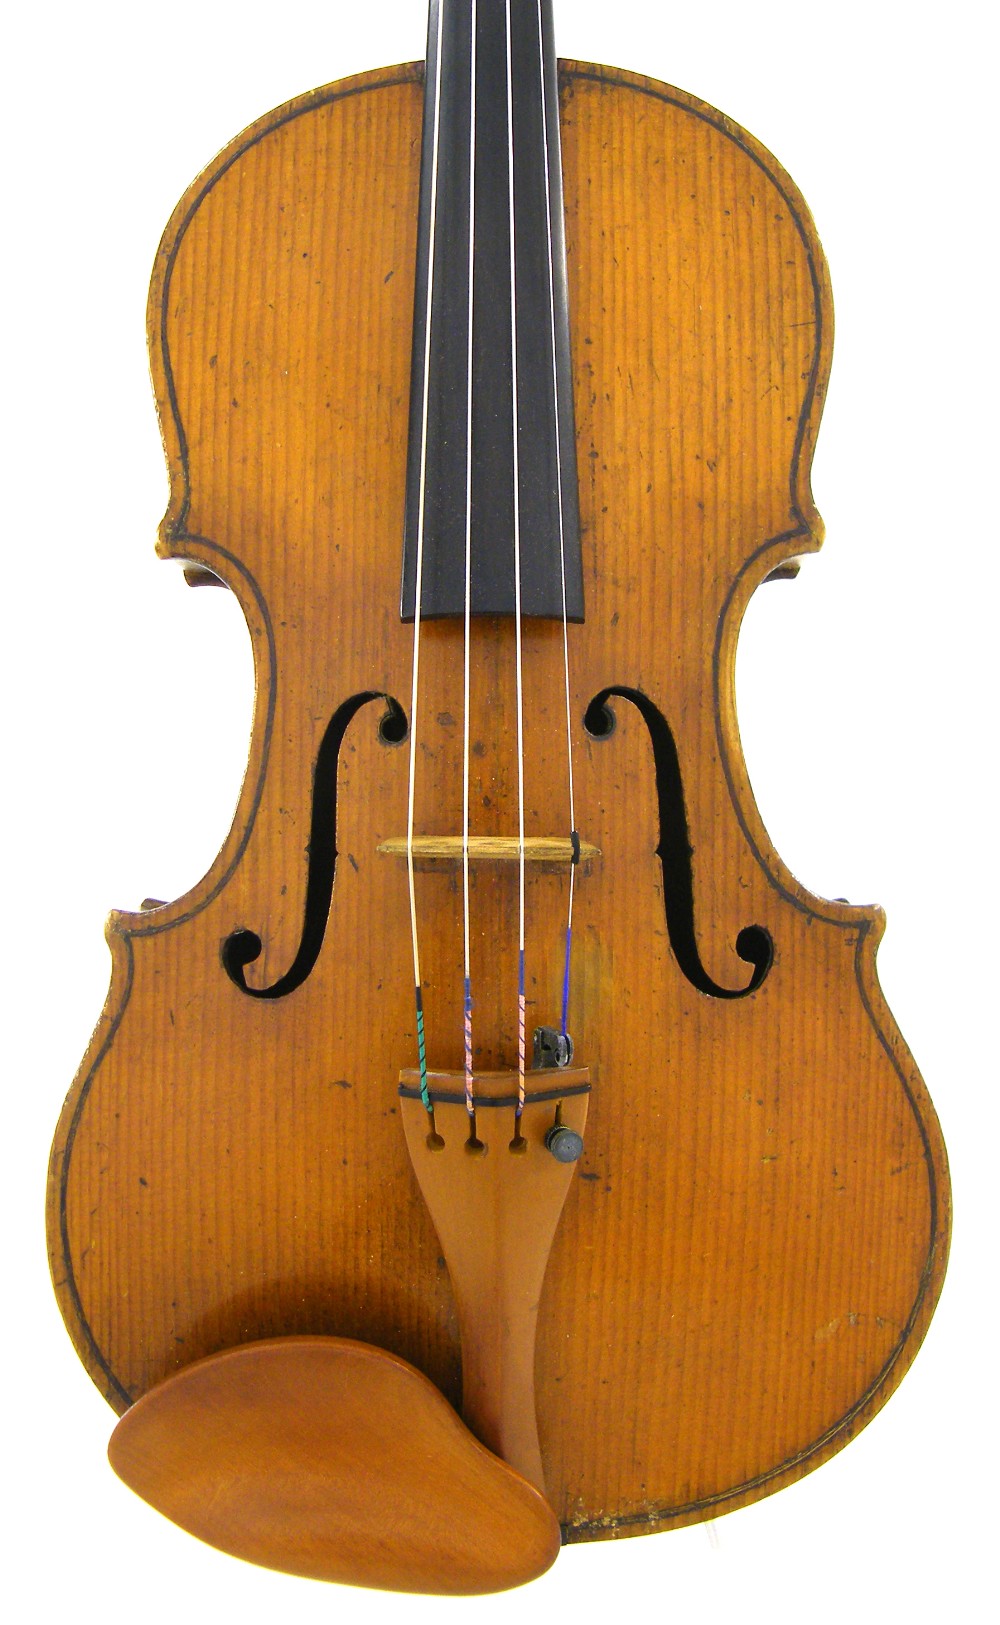 Violin inscribed in pencil John Underwood Nov 1845 to the inner back, first half of the 19th